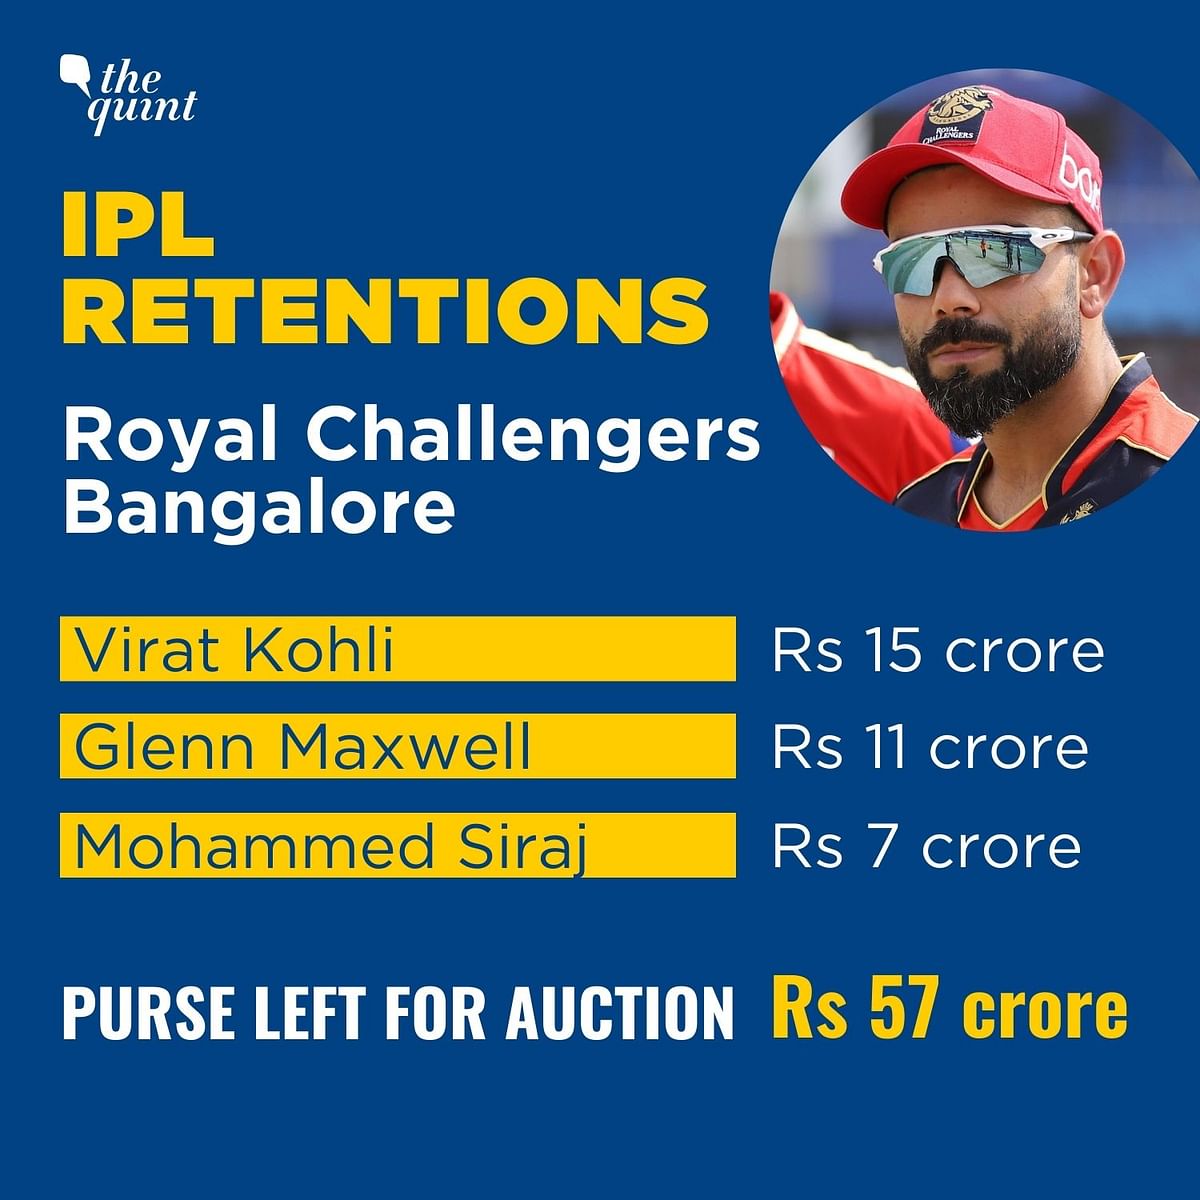 Chahal spoke to Ashwin about the IPL auction on a Youtube live.